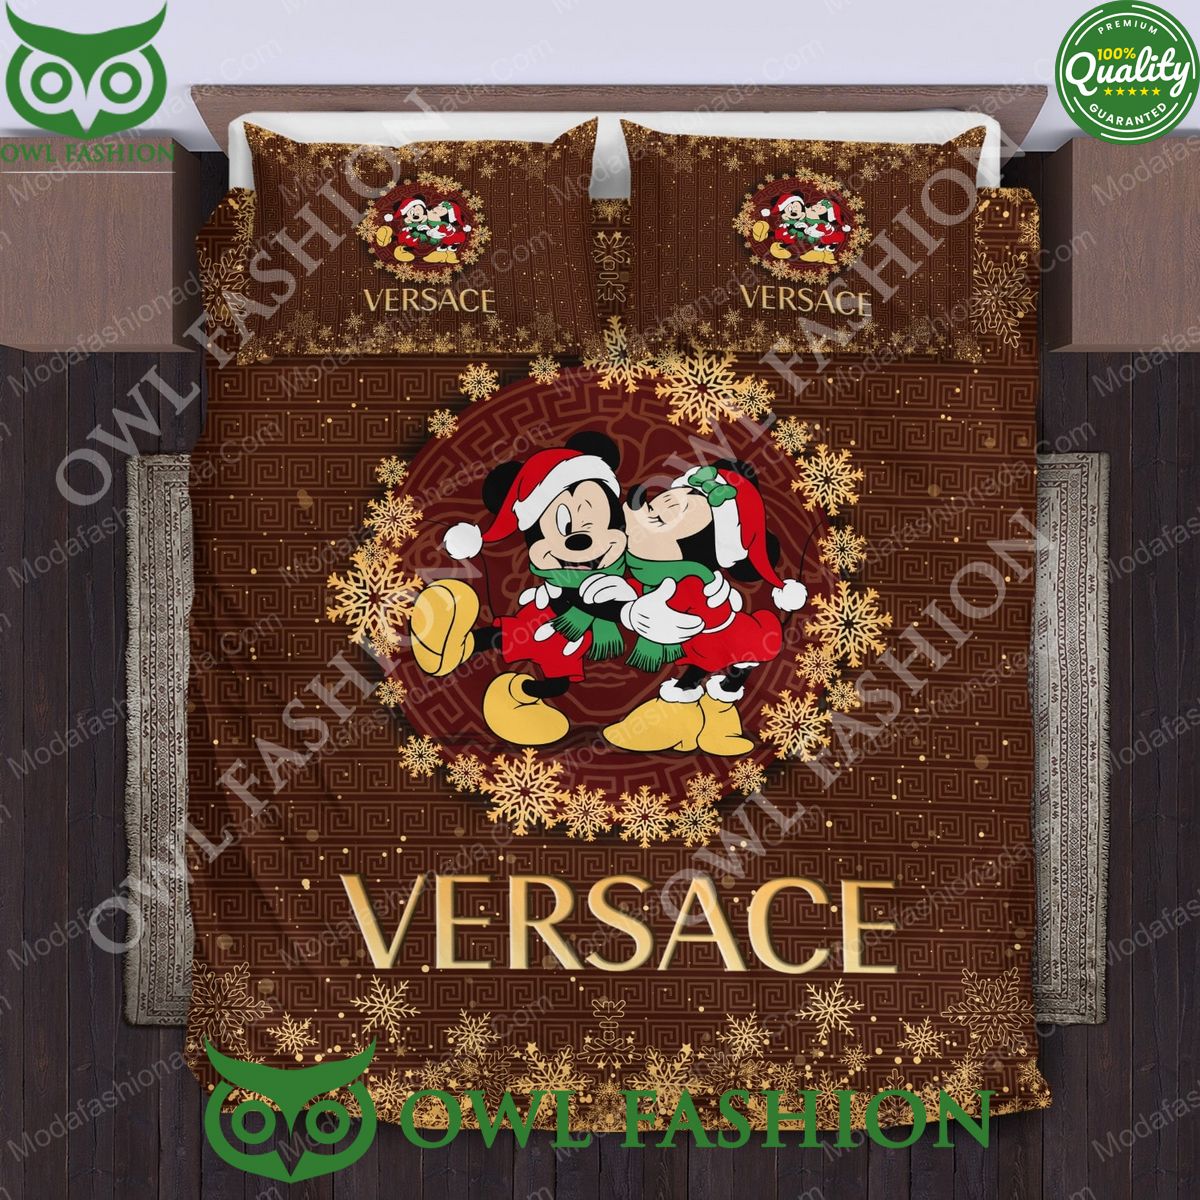 Mickey And Minnie Versace Merry Christmas Limited Bedding Set Cutting dash